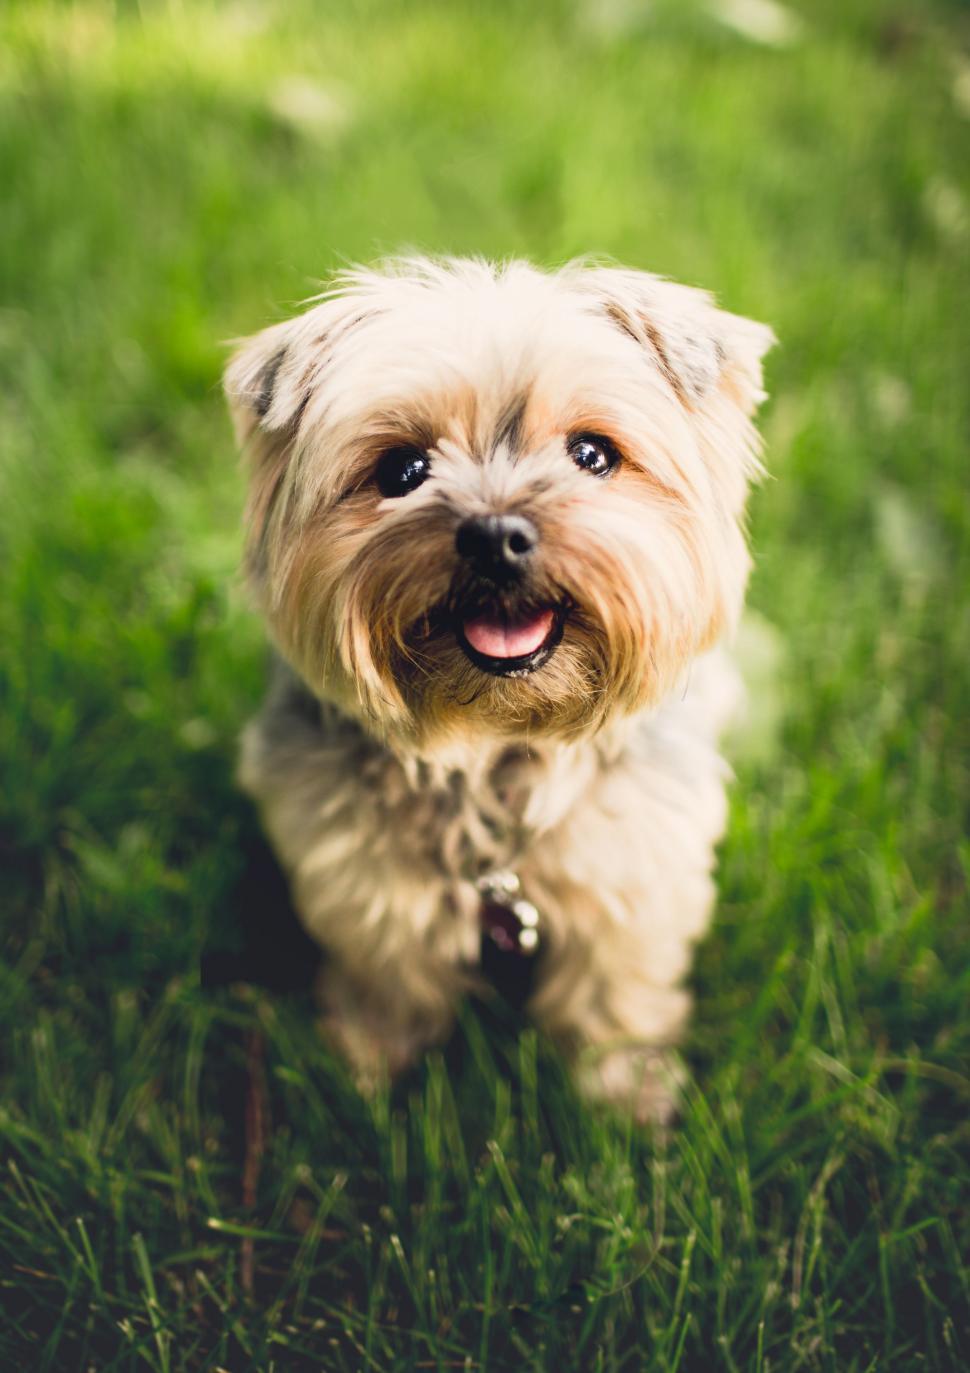 Free Image of Small Dog Sitting in Grass 